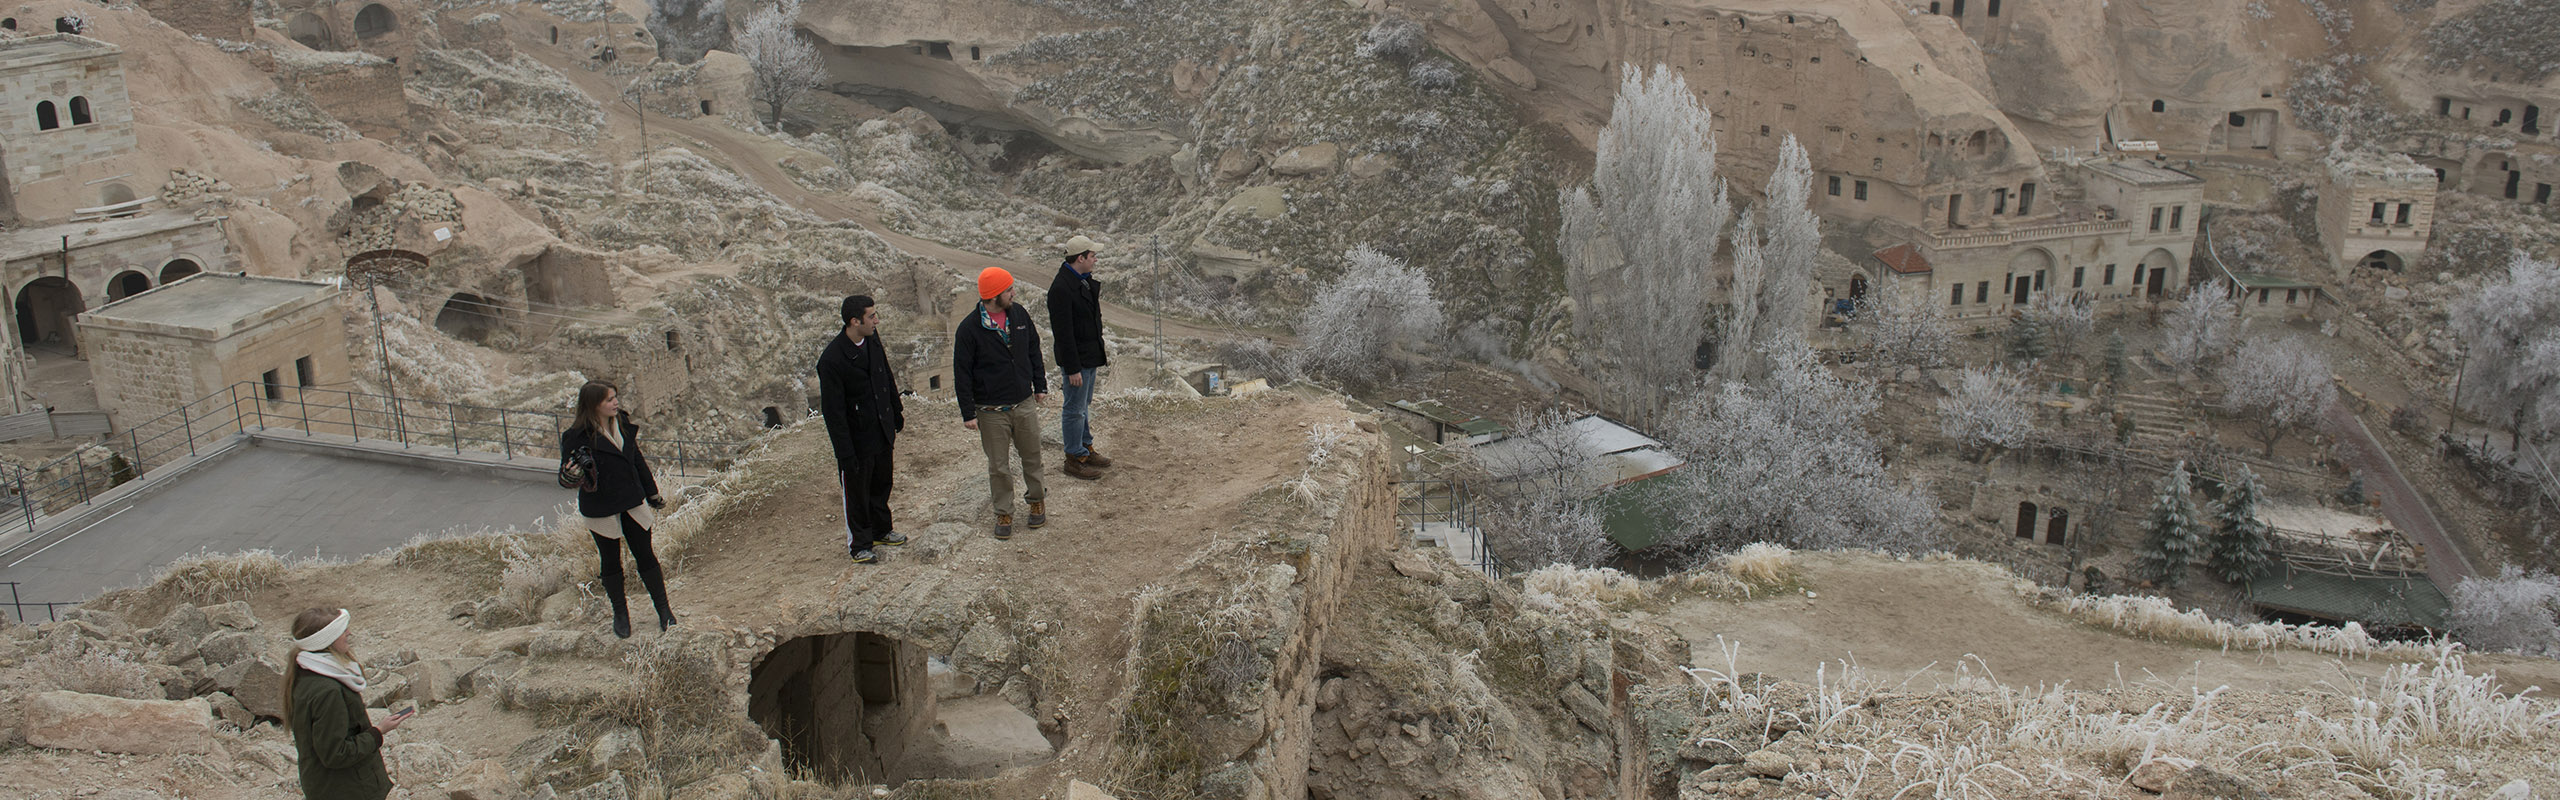 Elon students visit the Cappadocia region of central Turkey and explore abandoned cliff dwelling homes and structures.